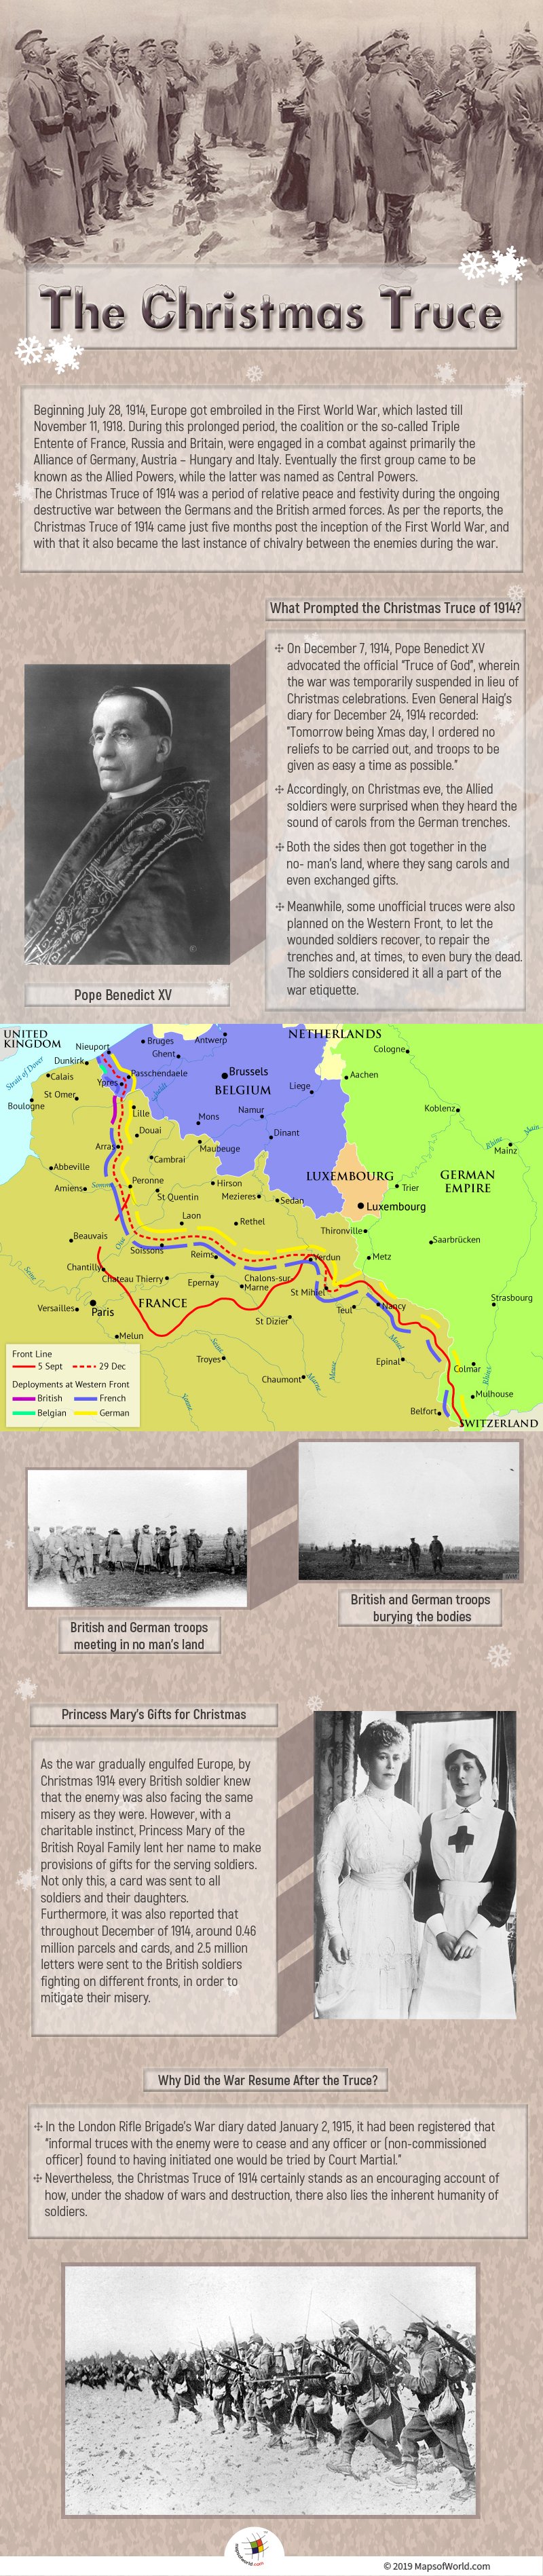 Infographic Giving Details on The Christmas Truce 1914